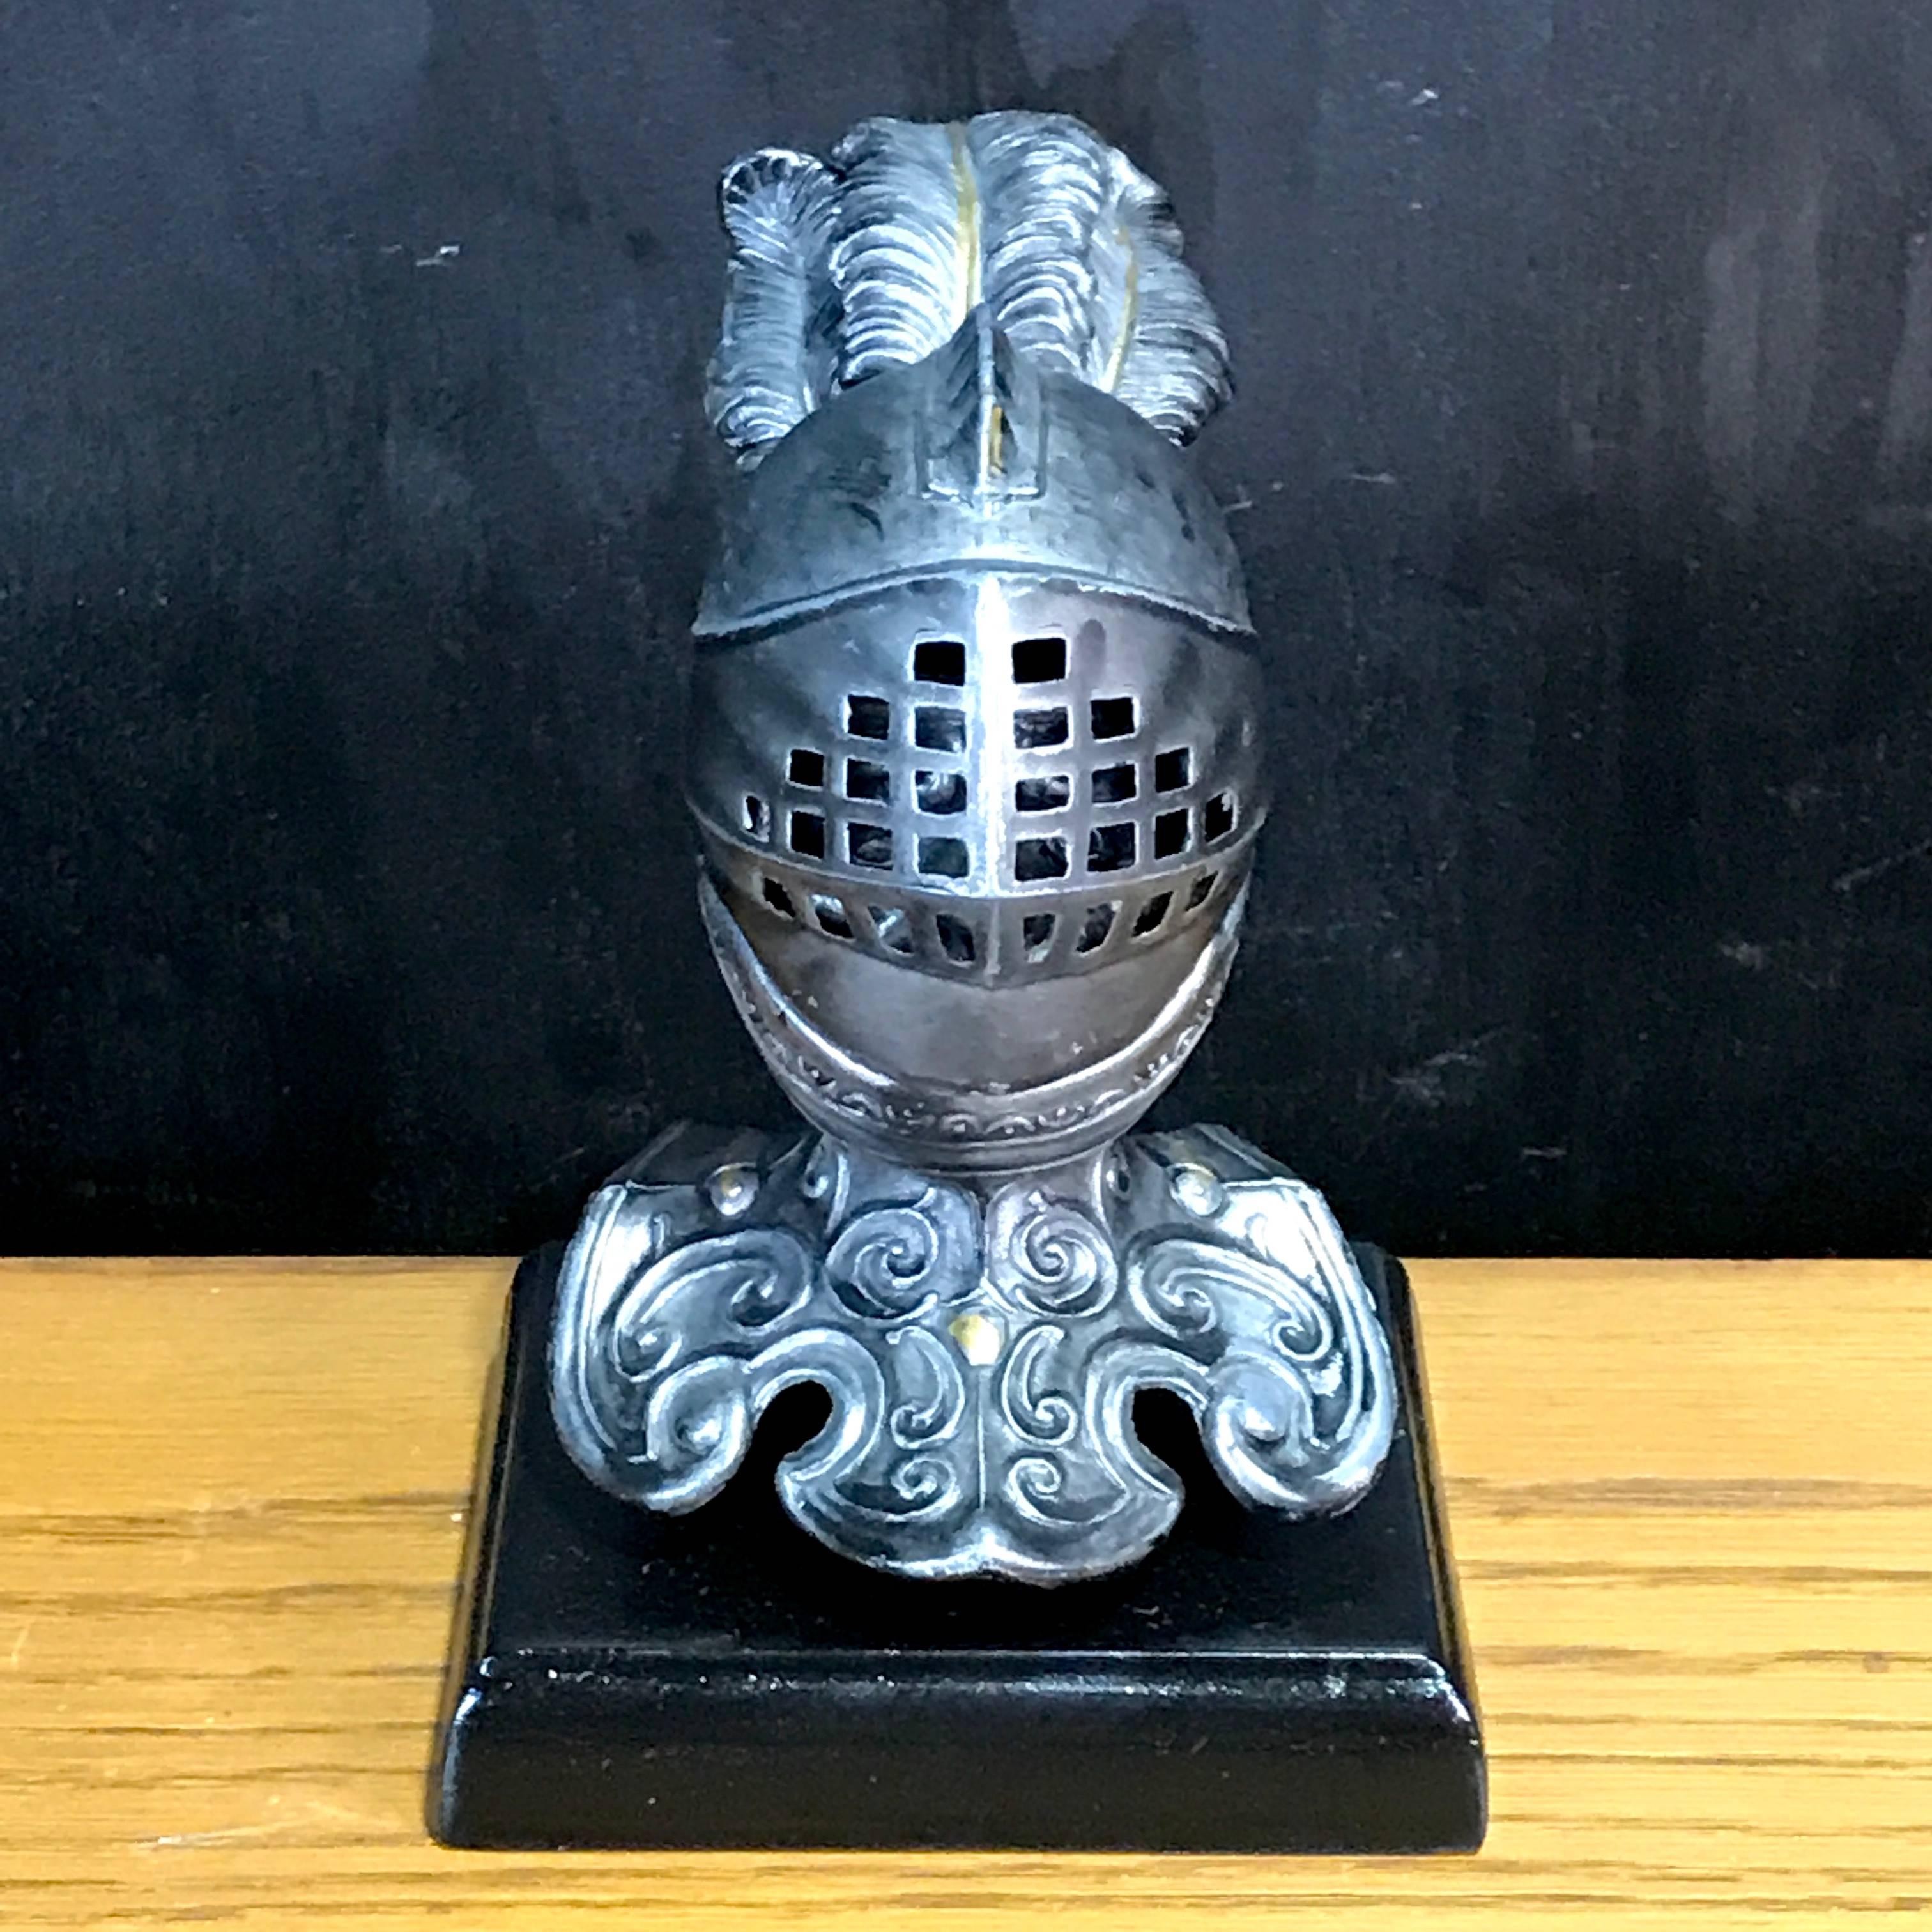 Tole Figural Knight Inkwell

Add a touch of classical whimsy to your home or office with our tole figural knight inkwell. Made in early 20th century England, this charming piece is adorned with an expressive knight complete with a lift top visor. It